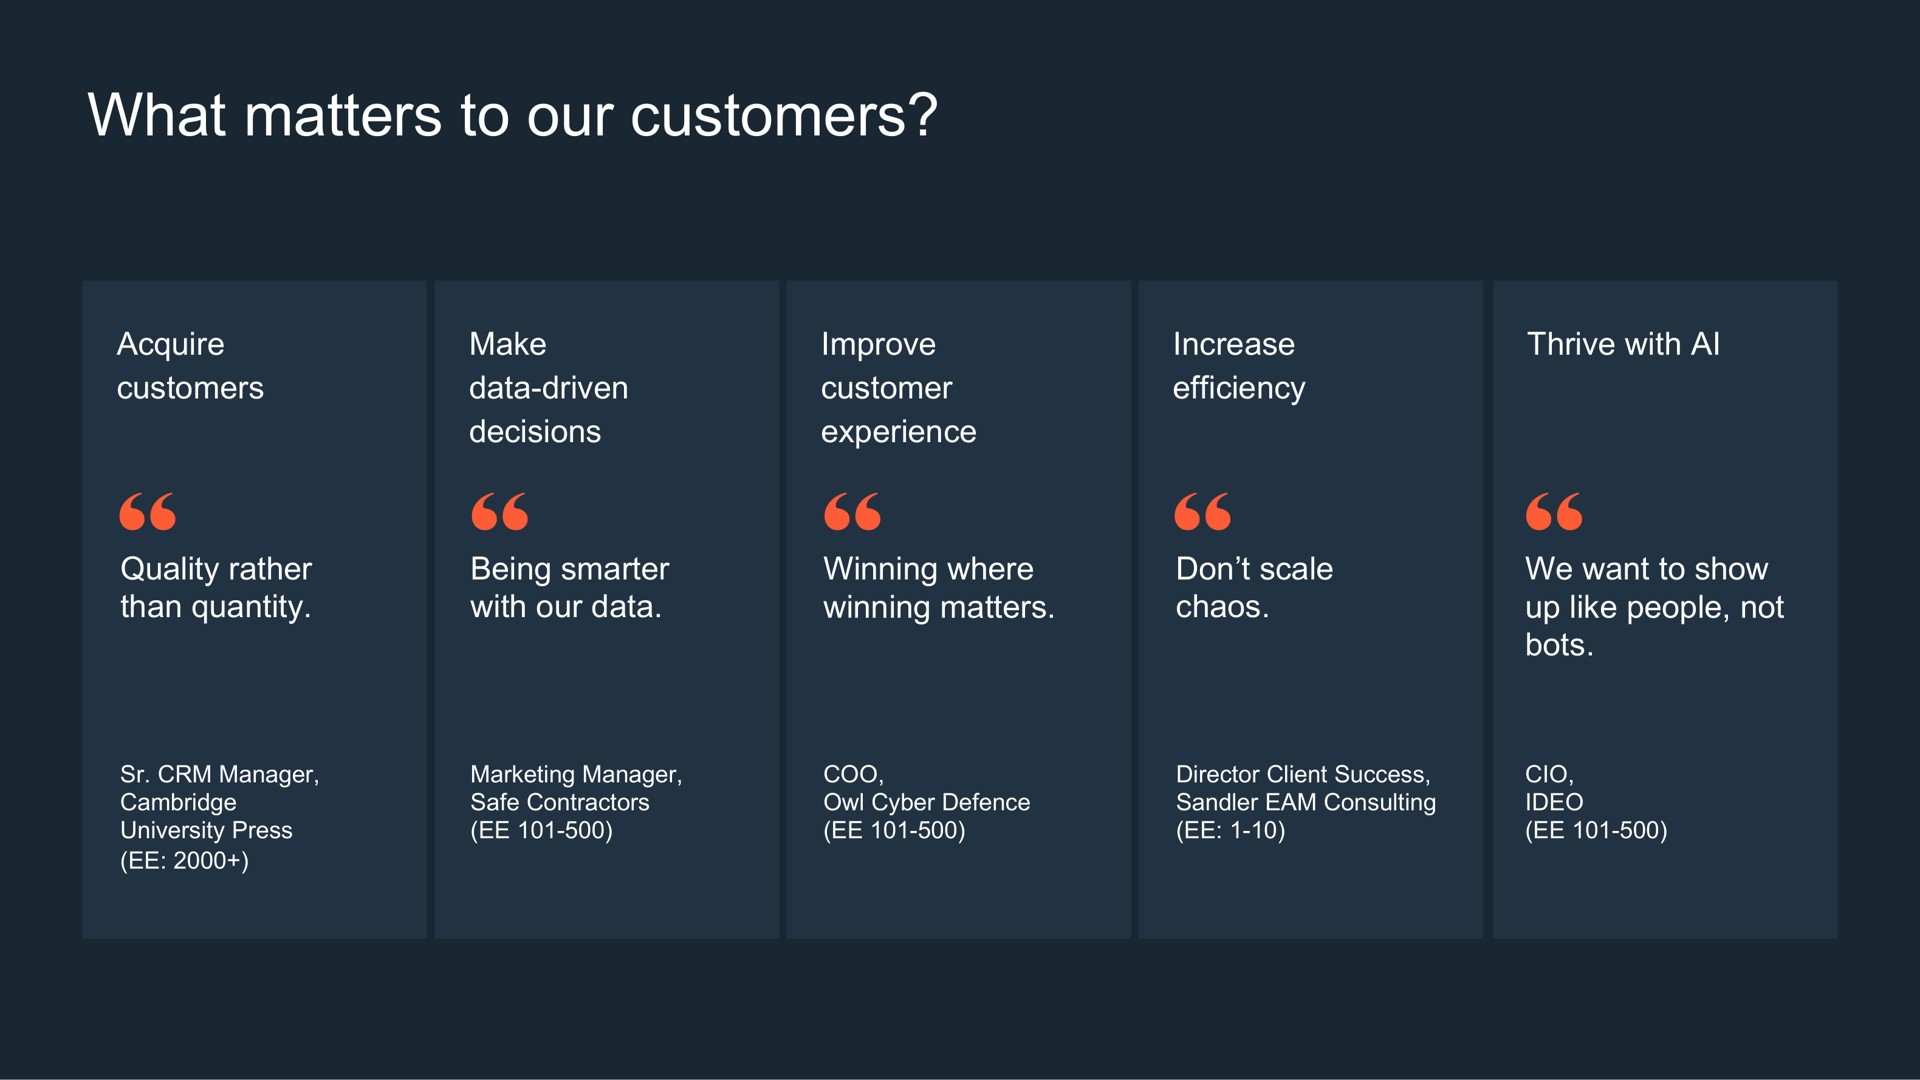 what matters to our customers | Hubspot